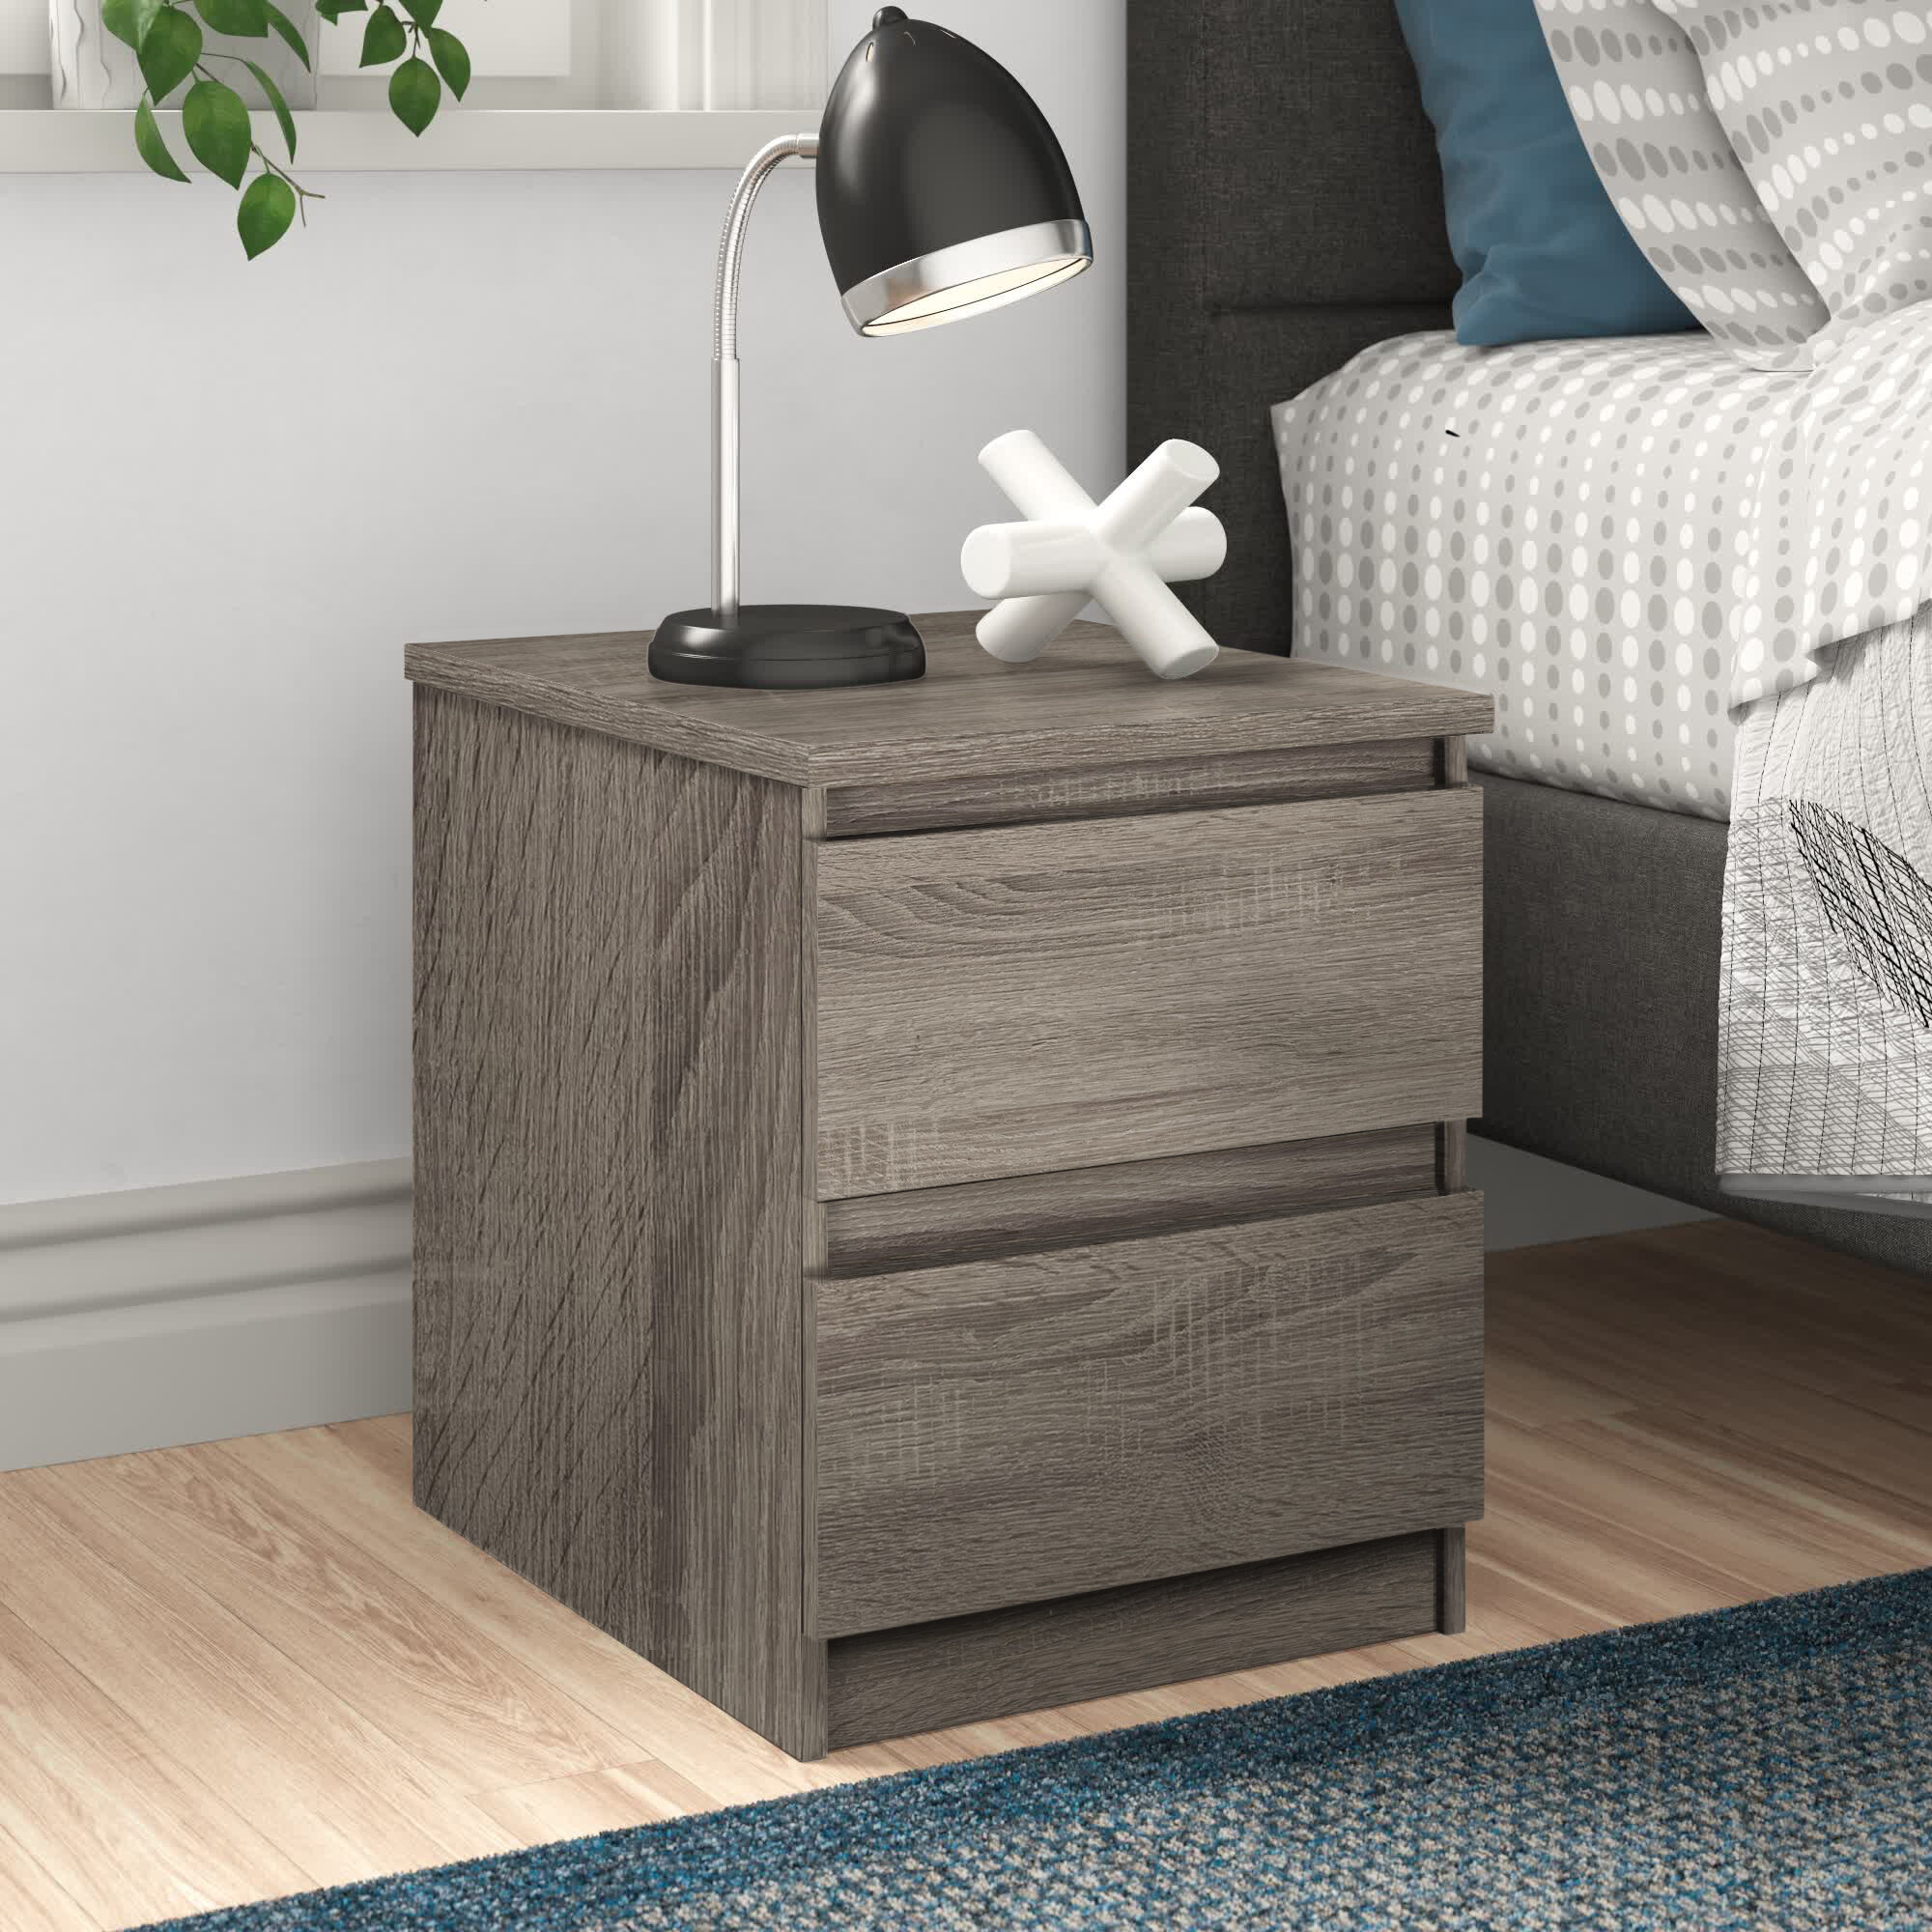 2 Drawer Small Chest Cabinet With Removable Legs Bedroom Modern Bedside Table 